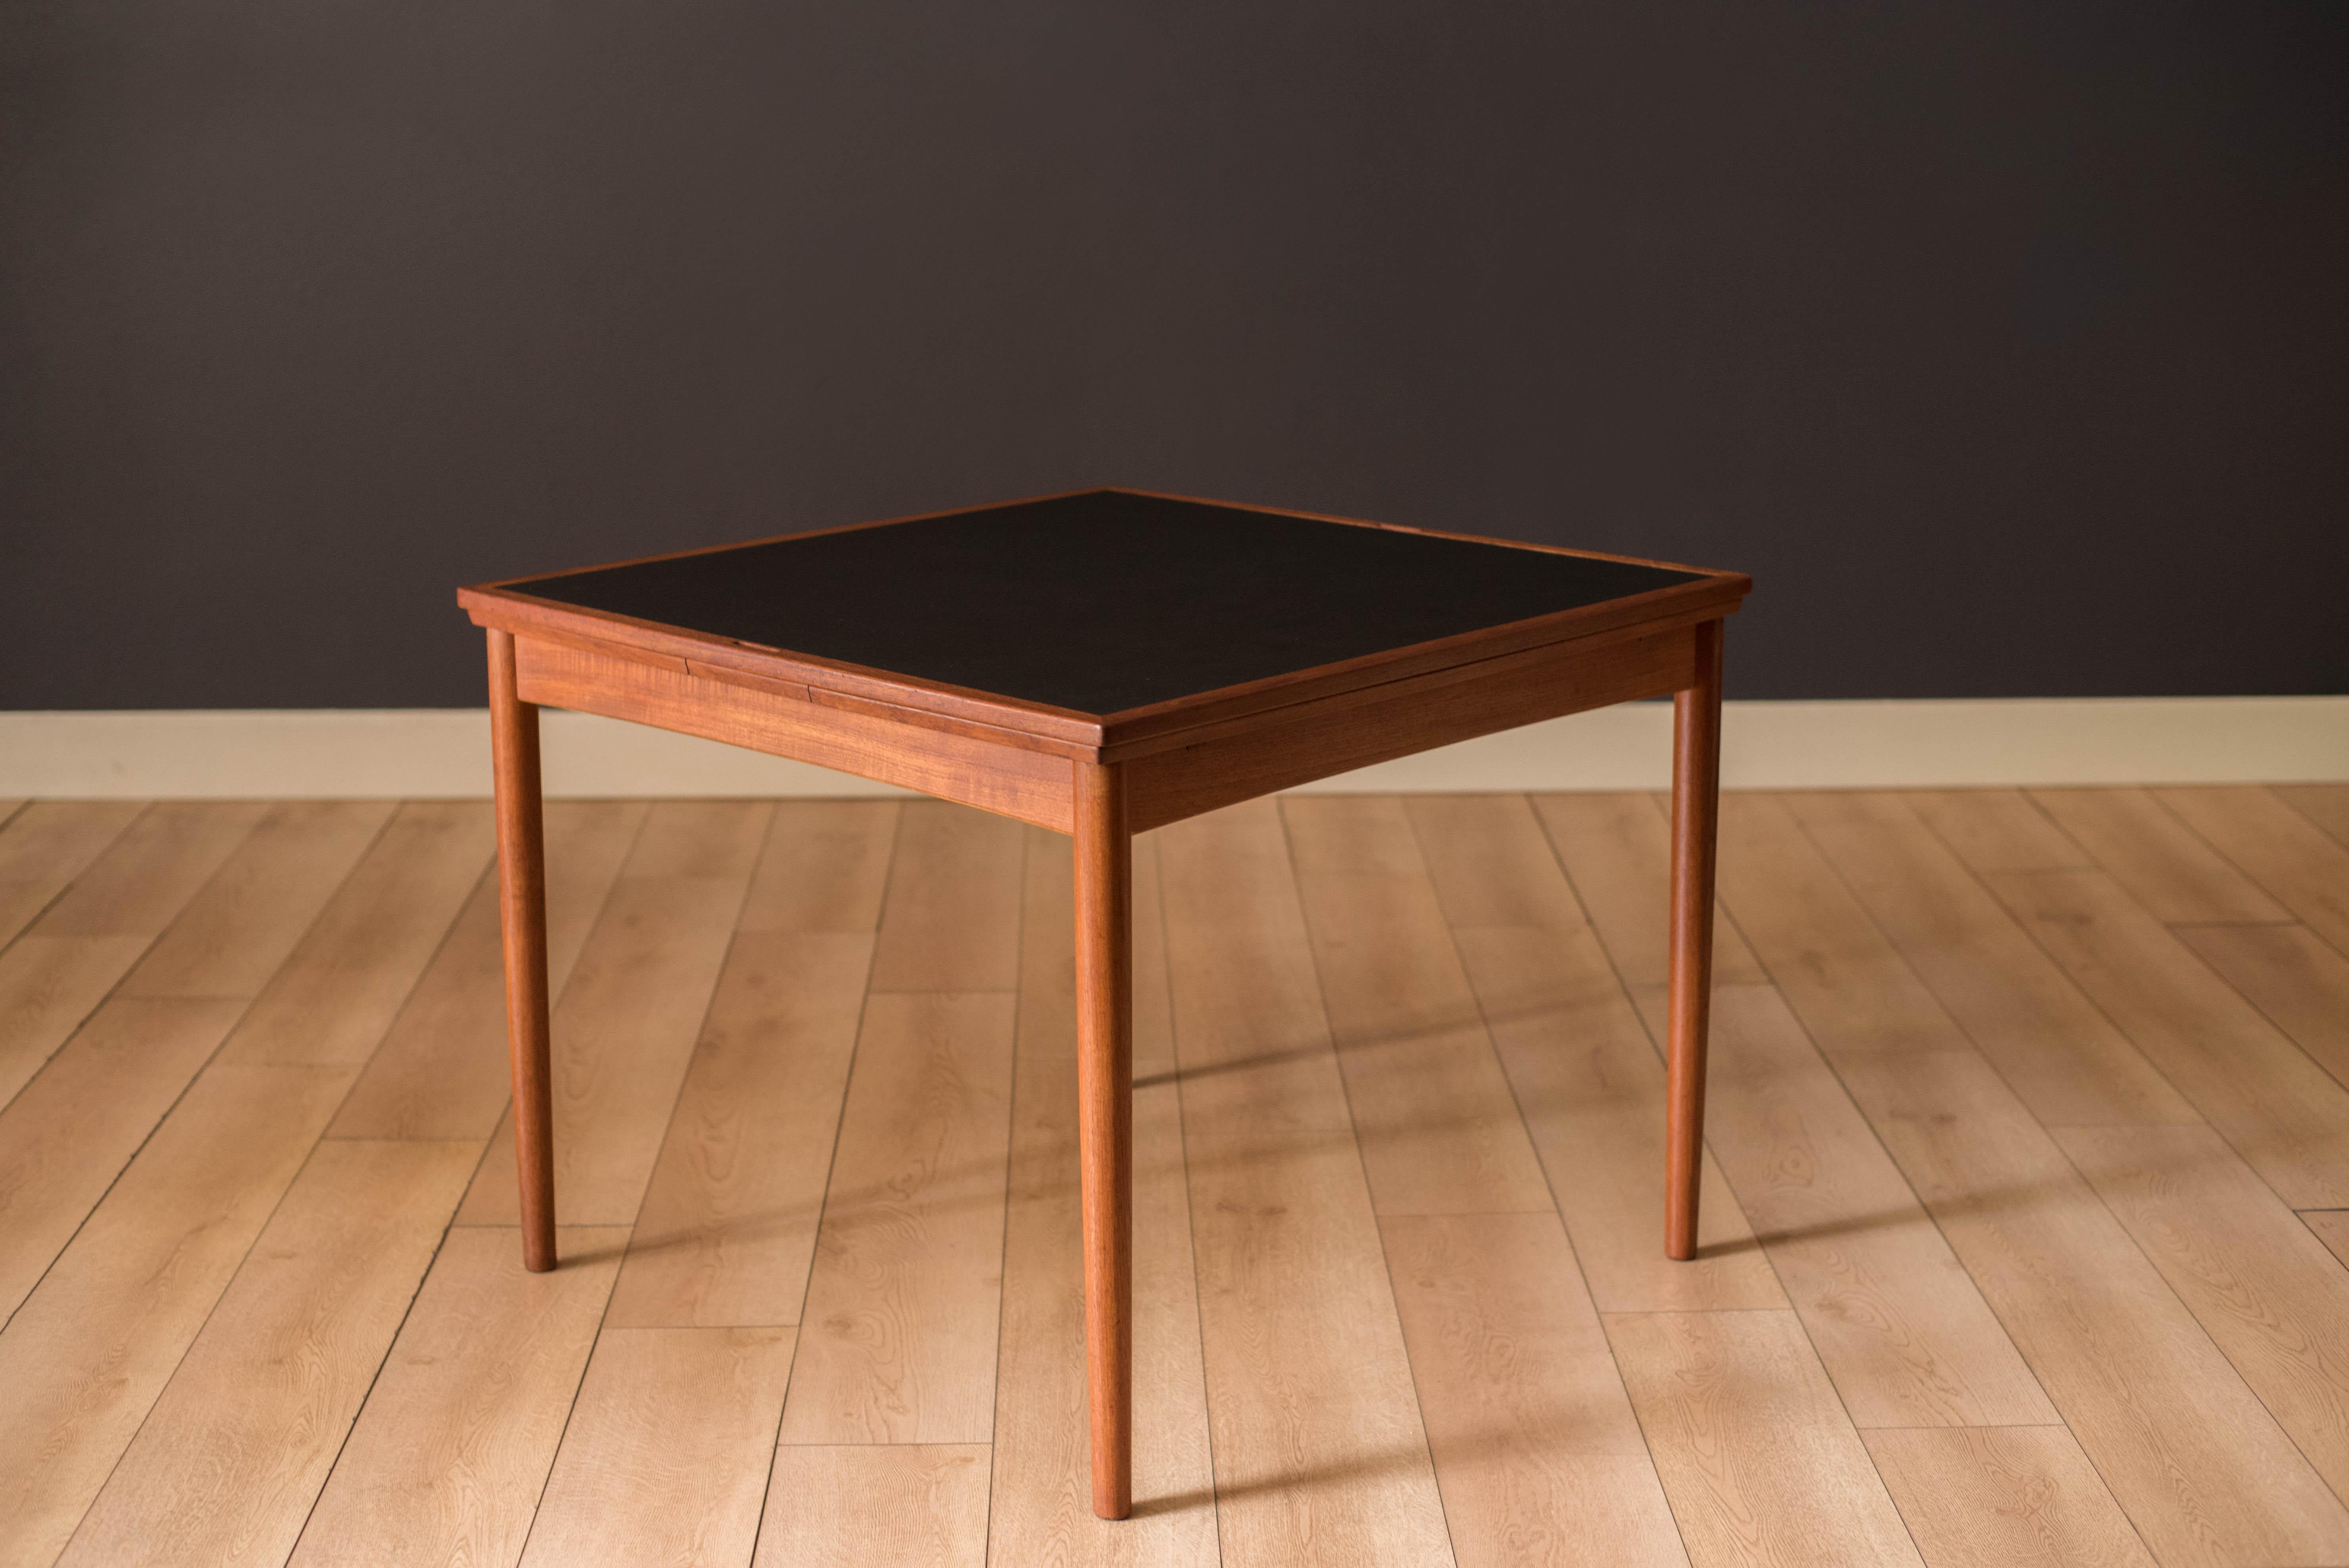 Mid Century Modern flip top card game table in teak by Carlo Jensen for Hundevad & Co., Denmark. This versatile piece has a reversible teak and black vinyl top that functions as a poker table and dining table. Seats four chairs comfortably and